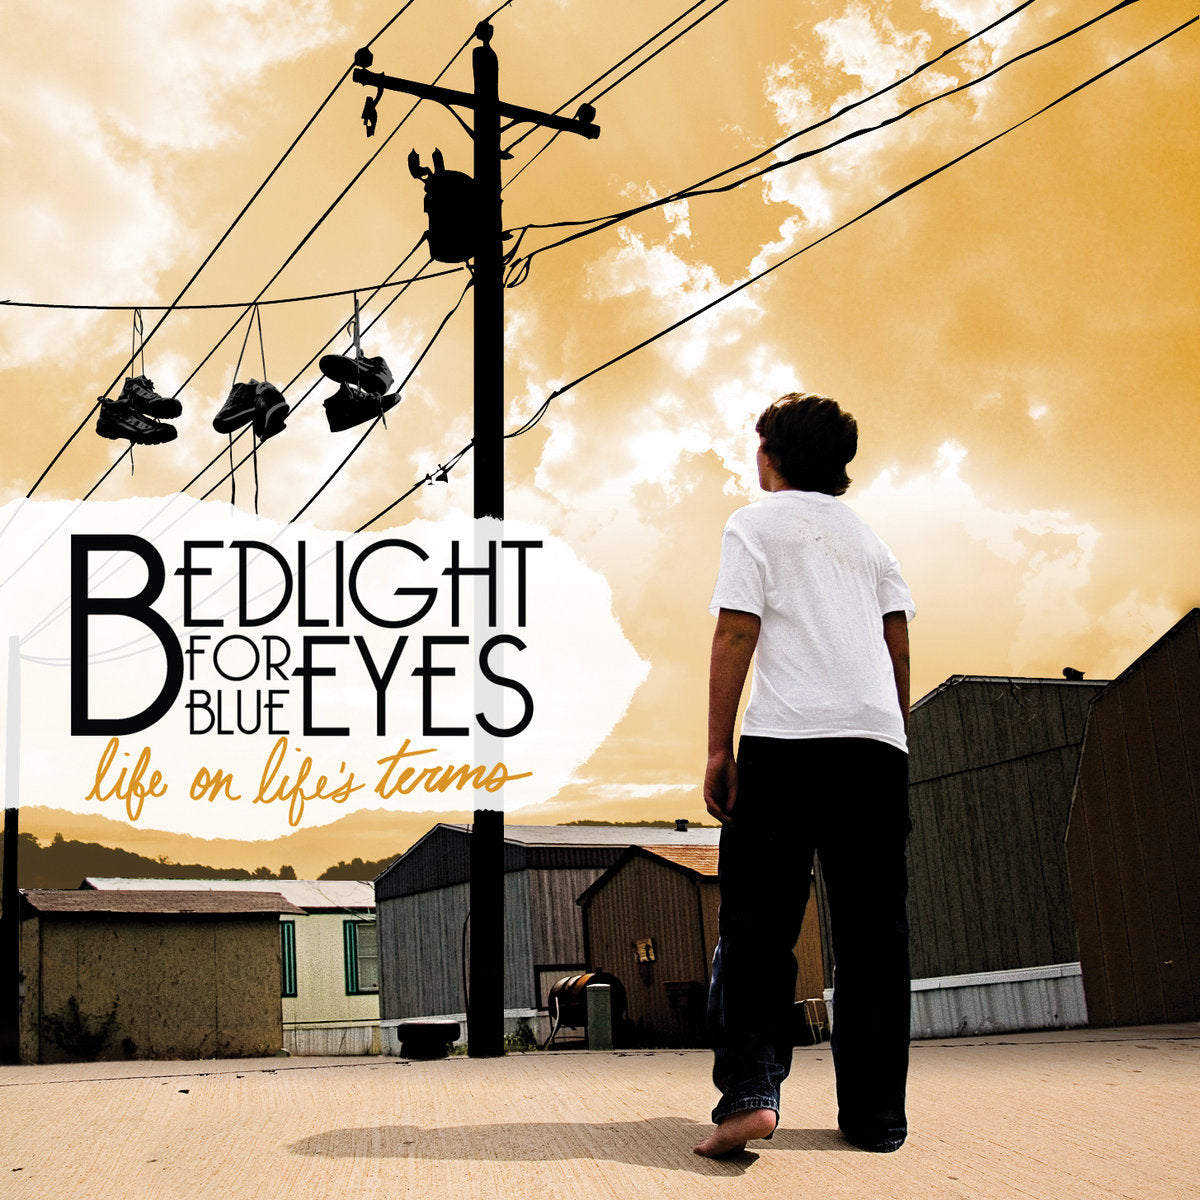 Bedlight for Blue Eyes "Life on Life's Terms" LP